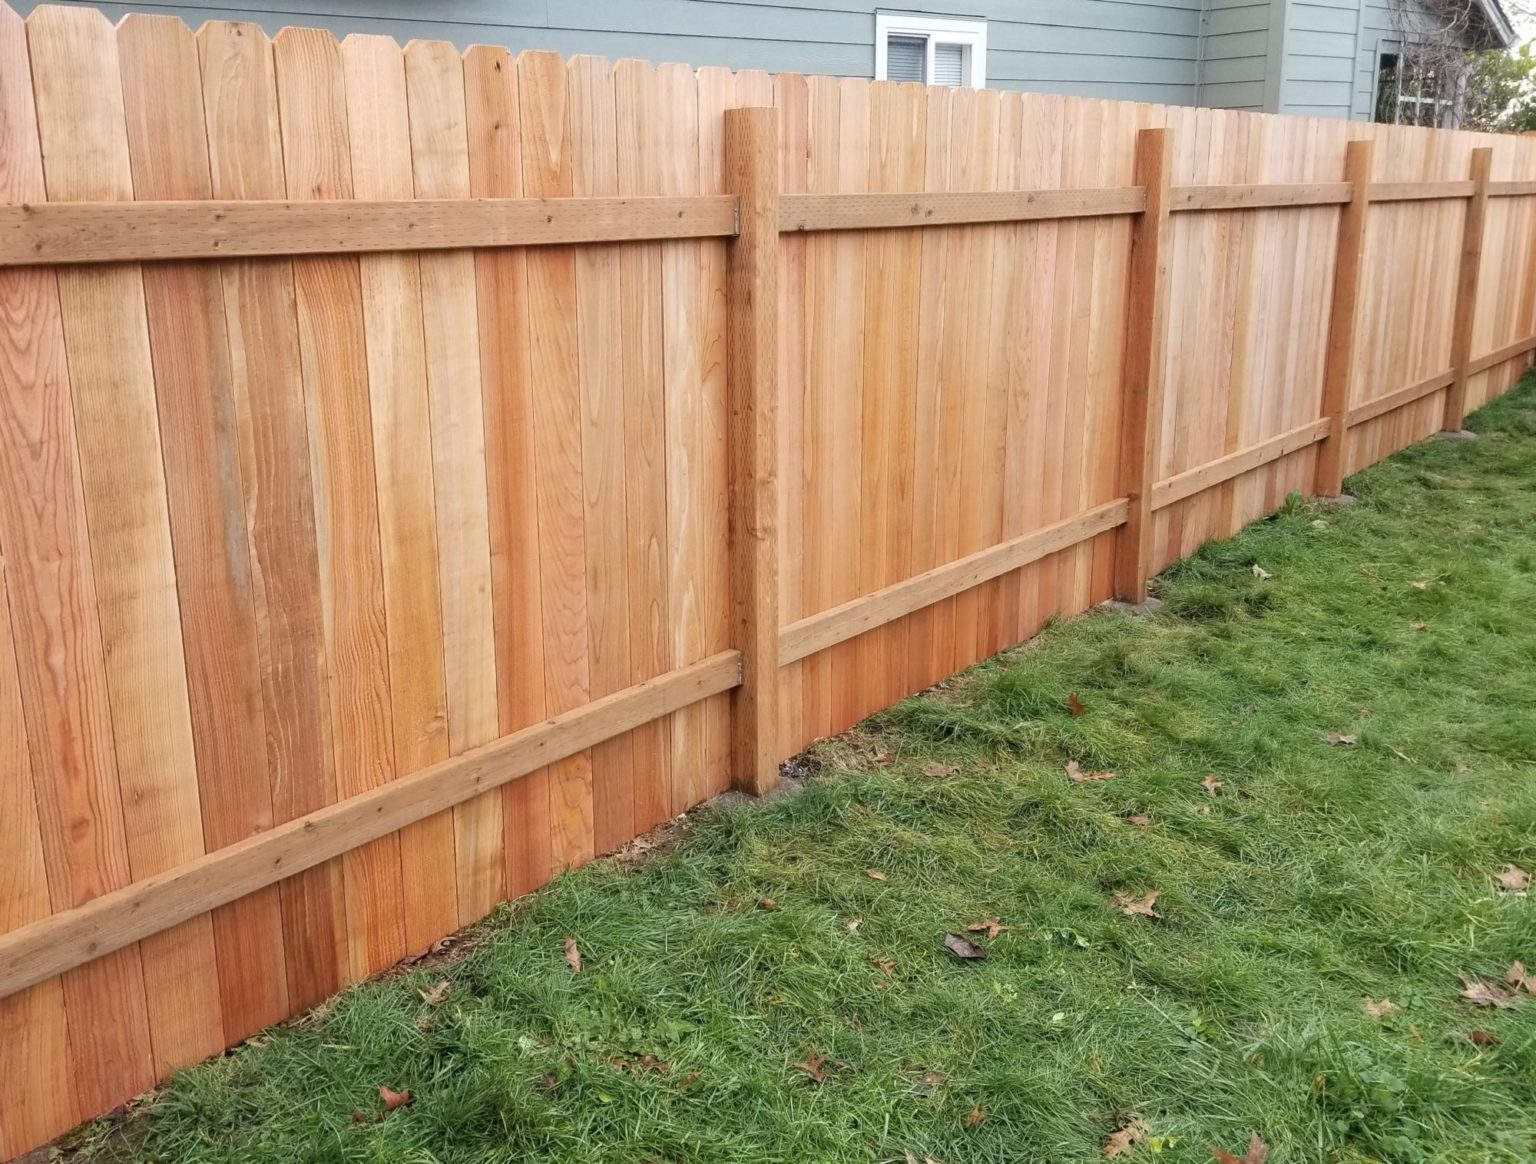 Traditional Wood Fence Designs and Types | FenceWorks NW